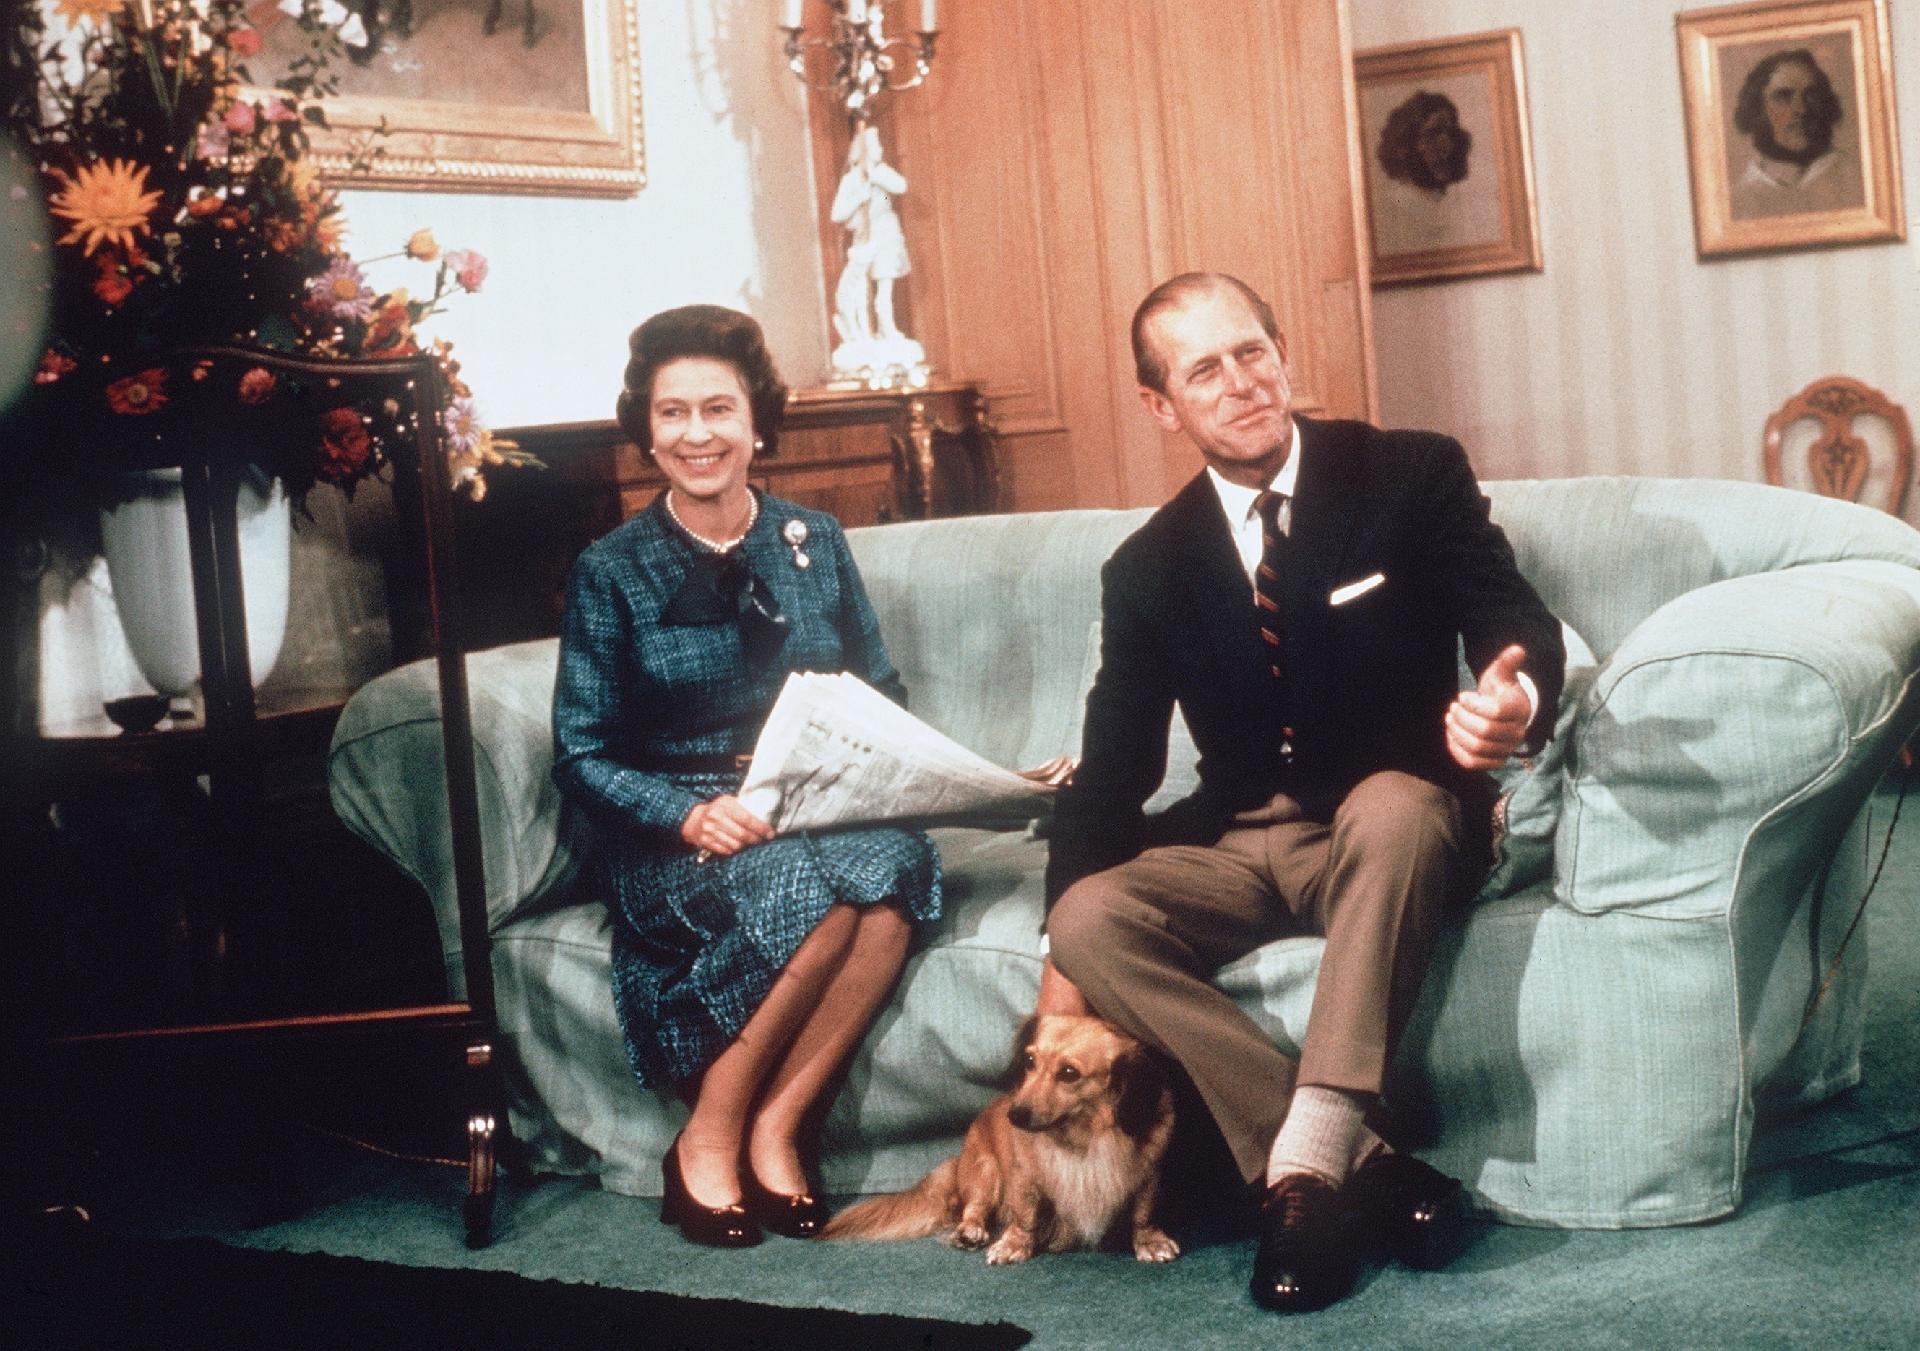 Queen Elizabeth II with Prince Philip at Balmoral, Scotland in 1975 - Getty Images